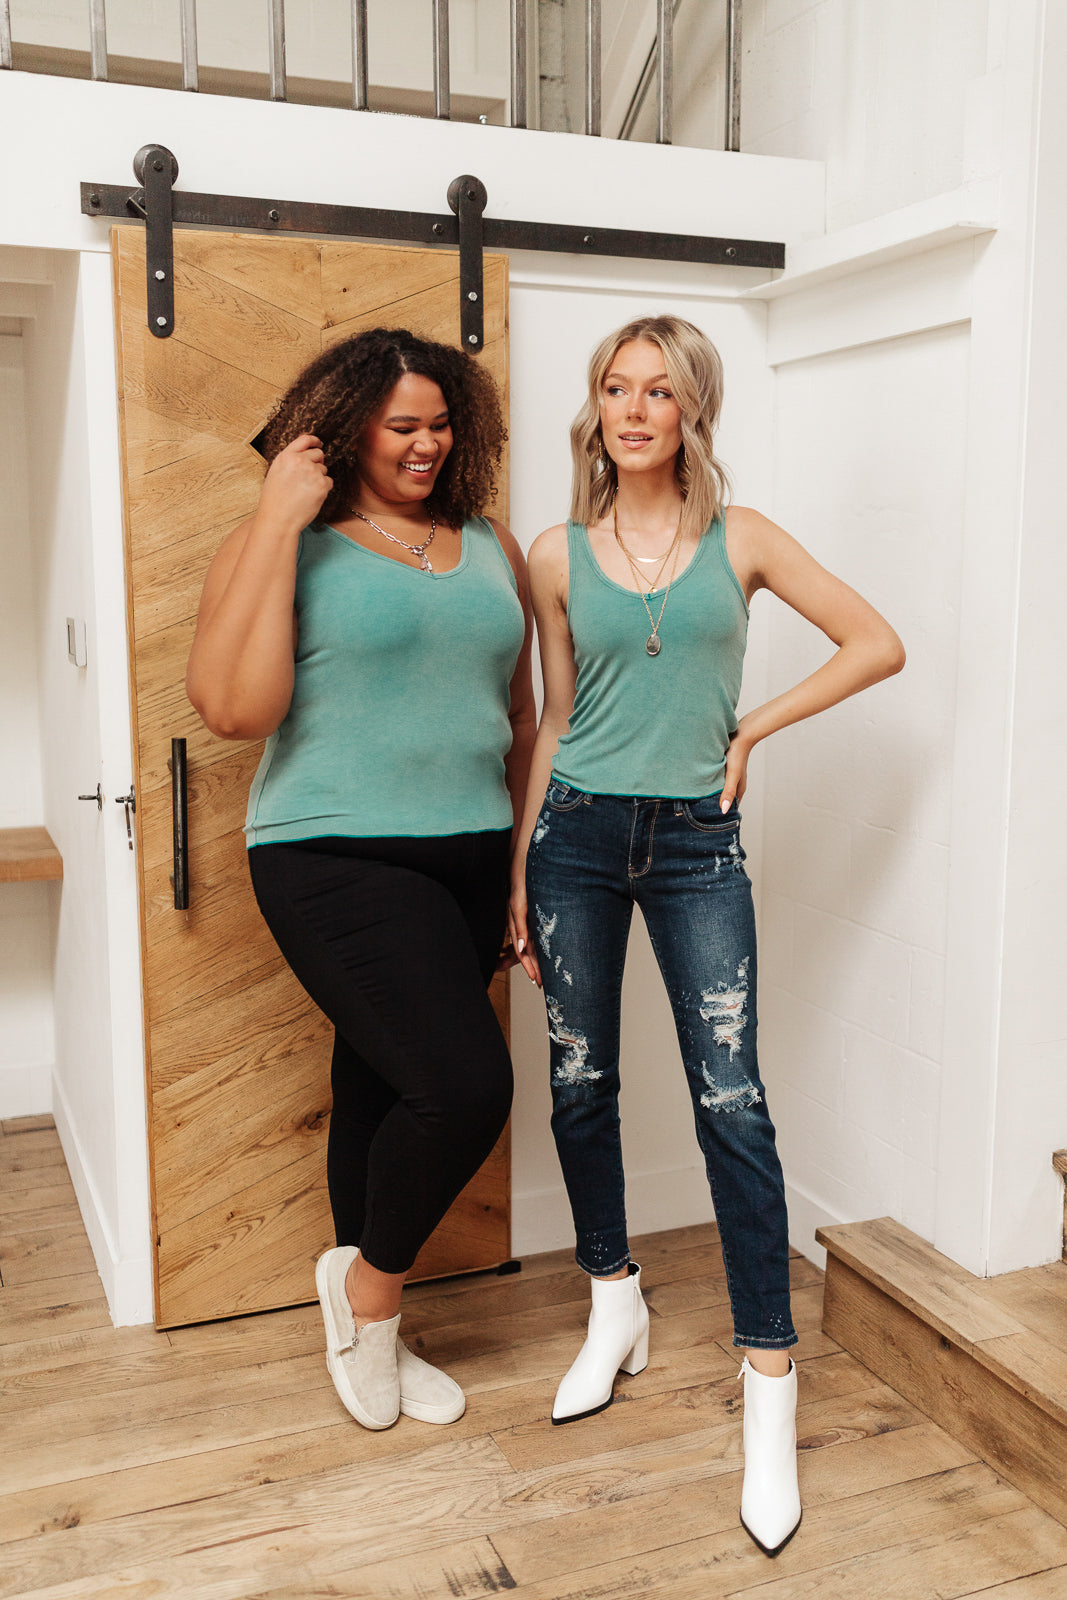 Stay Easy Tank In Aqua (Online Exclusive)